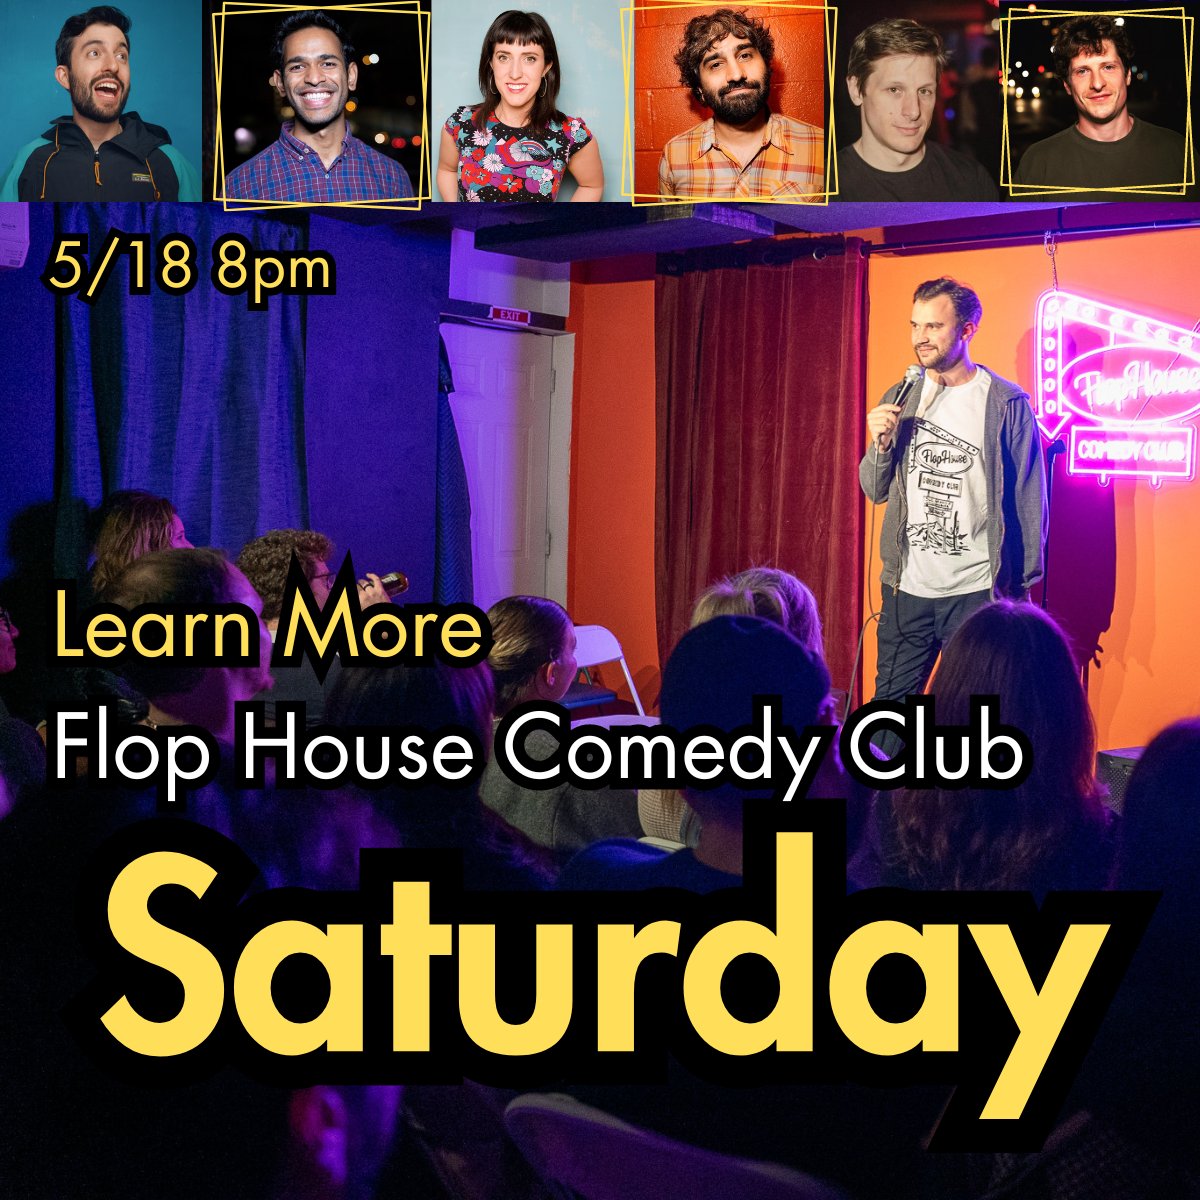 Join Flop House Comedy Club on May 18th for a night of laughter featuring Kate Willett, known for her raunchy feminist storytelling and appearances on The Late Show with Stephen Colbert. Secure your spot now and experience the magic of live comedy!